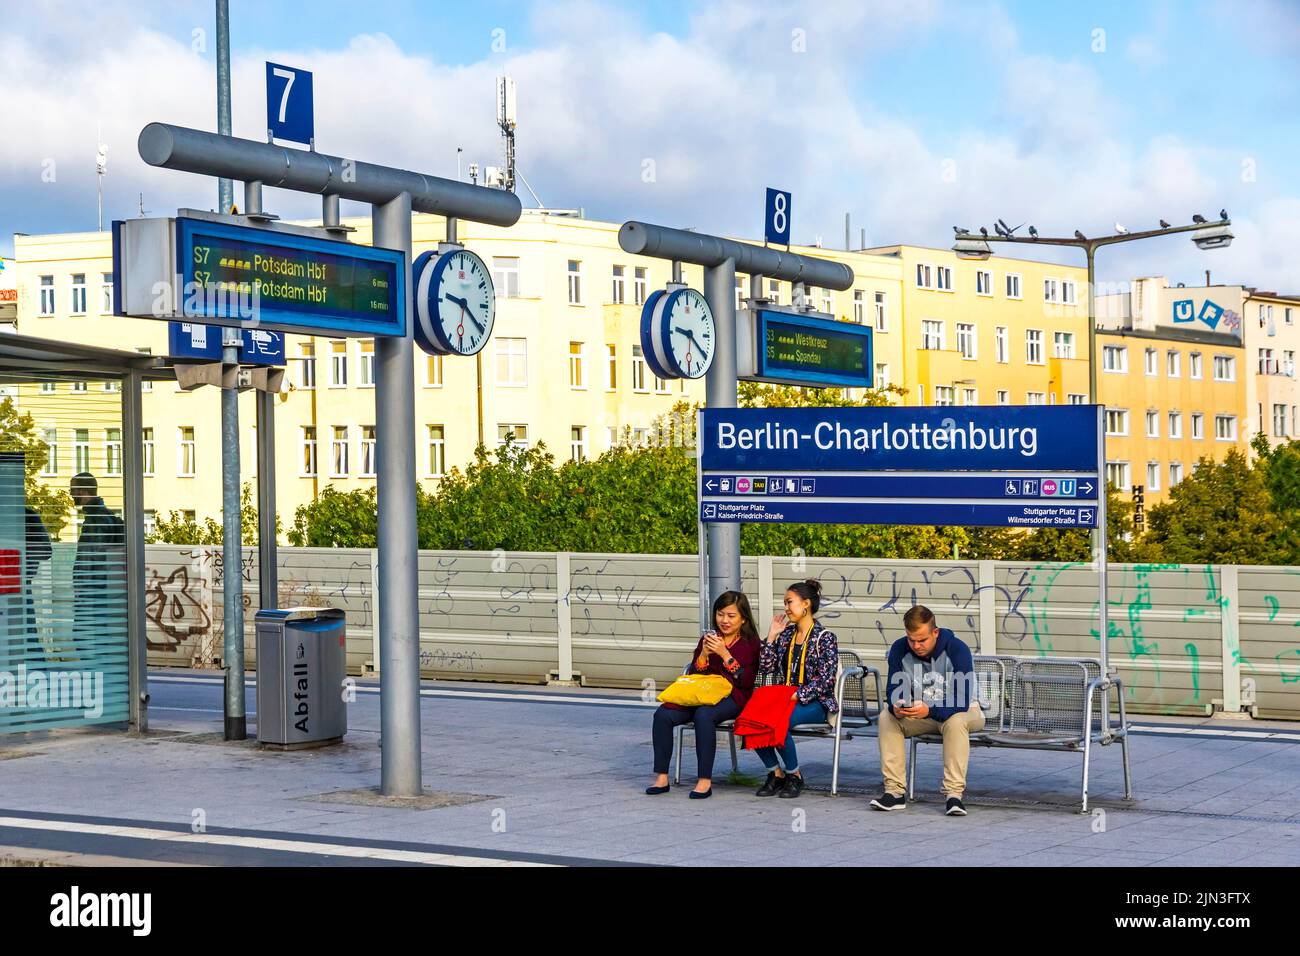 Berlin, Germany - September 15, 2019: People waiting train at Berlin-Charlottenburg railway station in Berlin. Station served by S3,S5,S7 and S9 lines Stock Photo